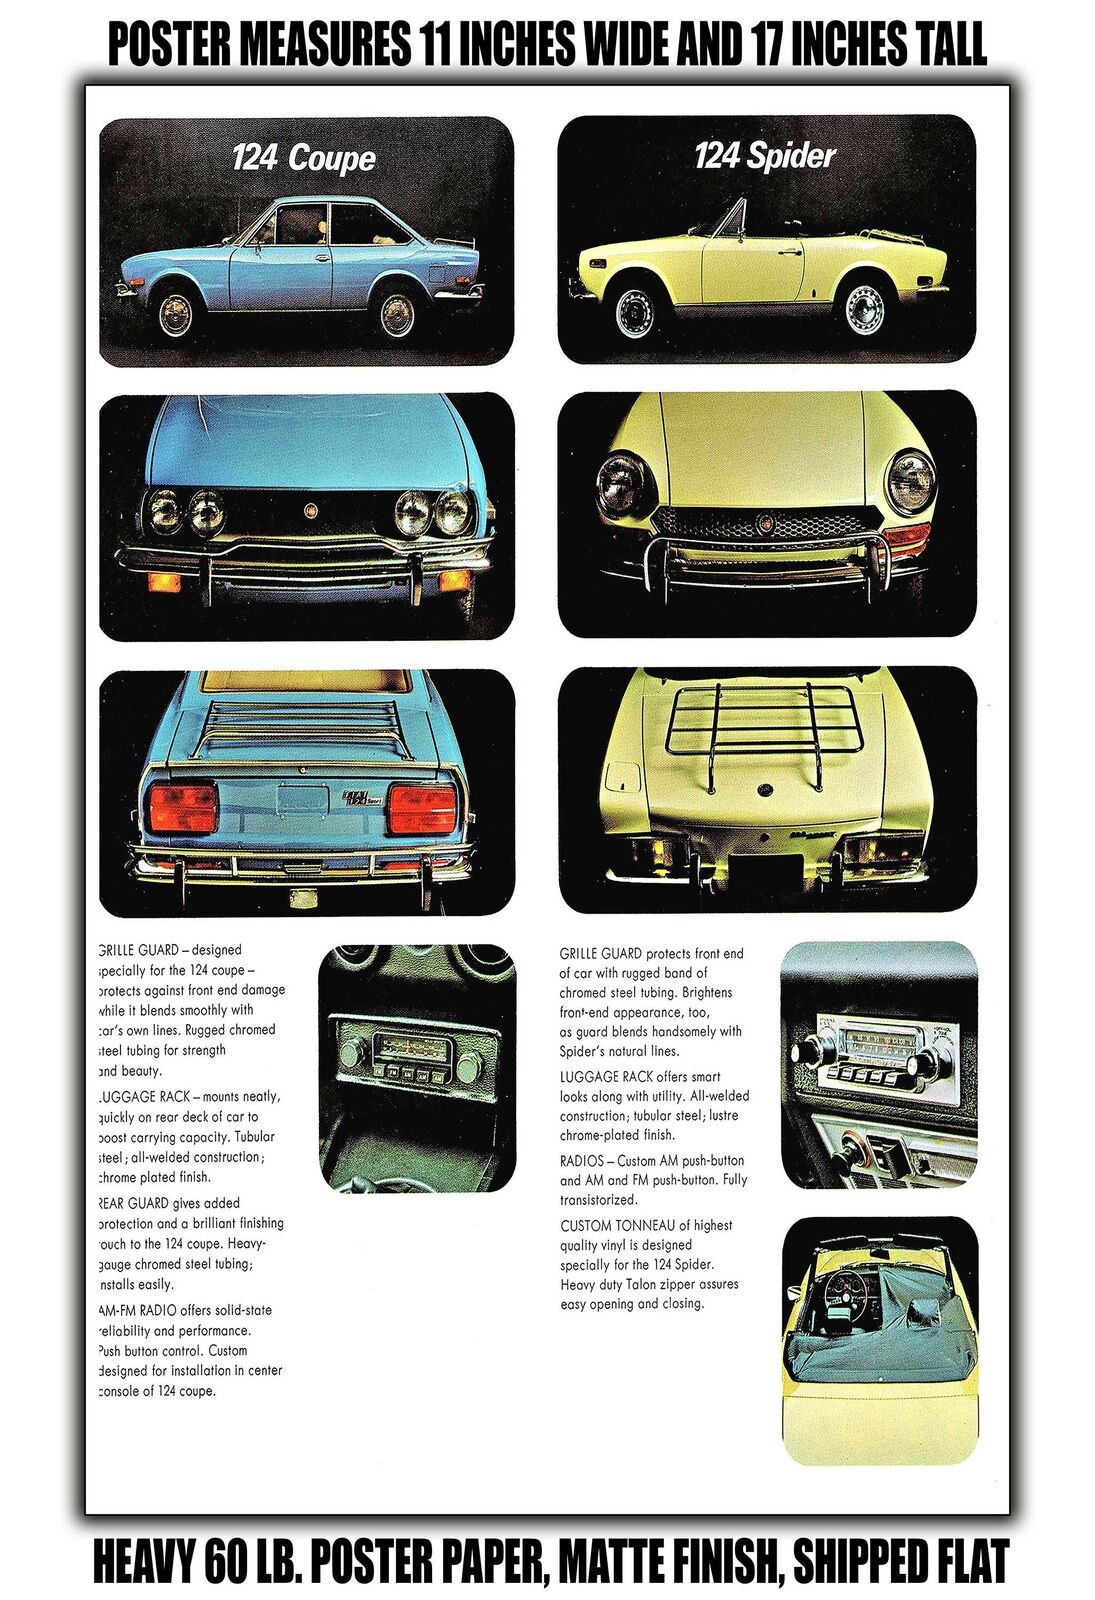 11x17 POSTER - 1972 Fiat 124 Coupe Spider Accessories